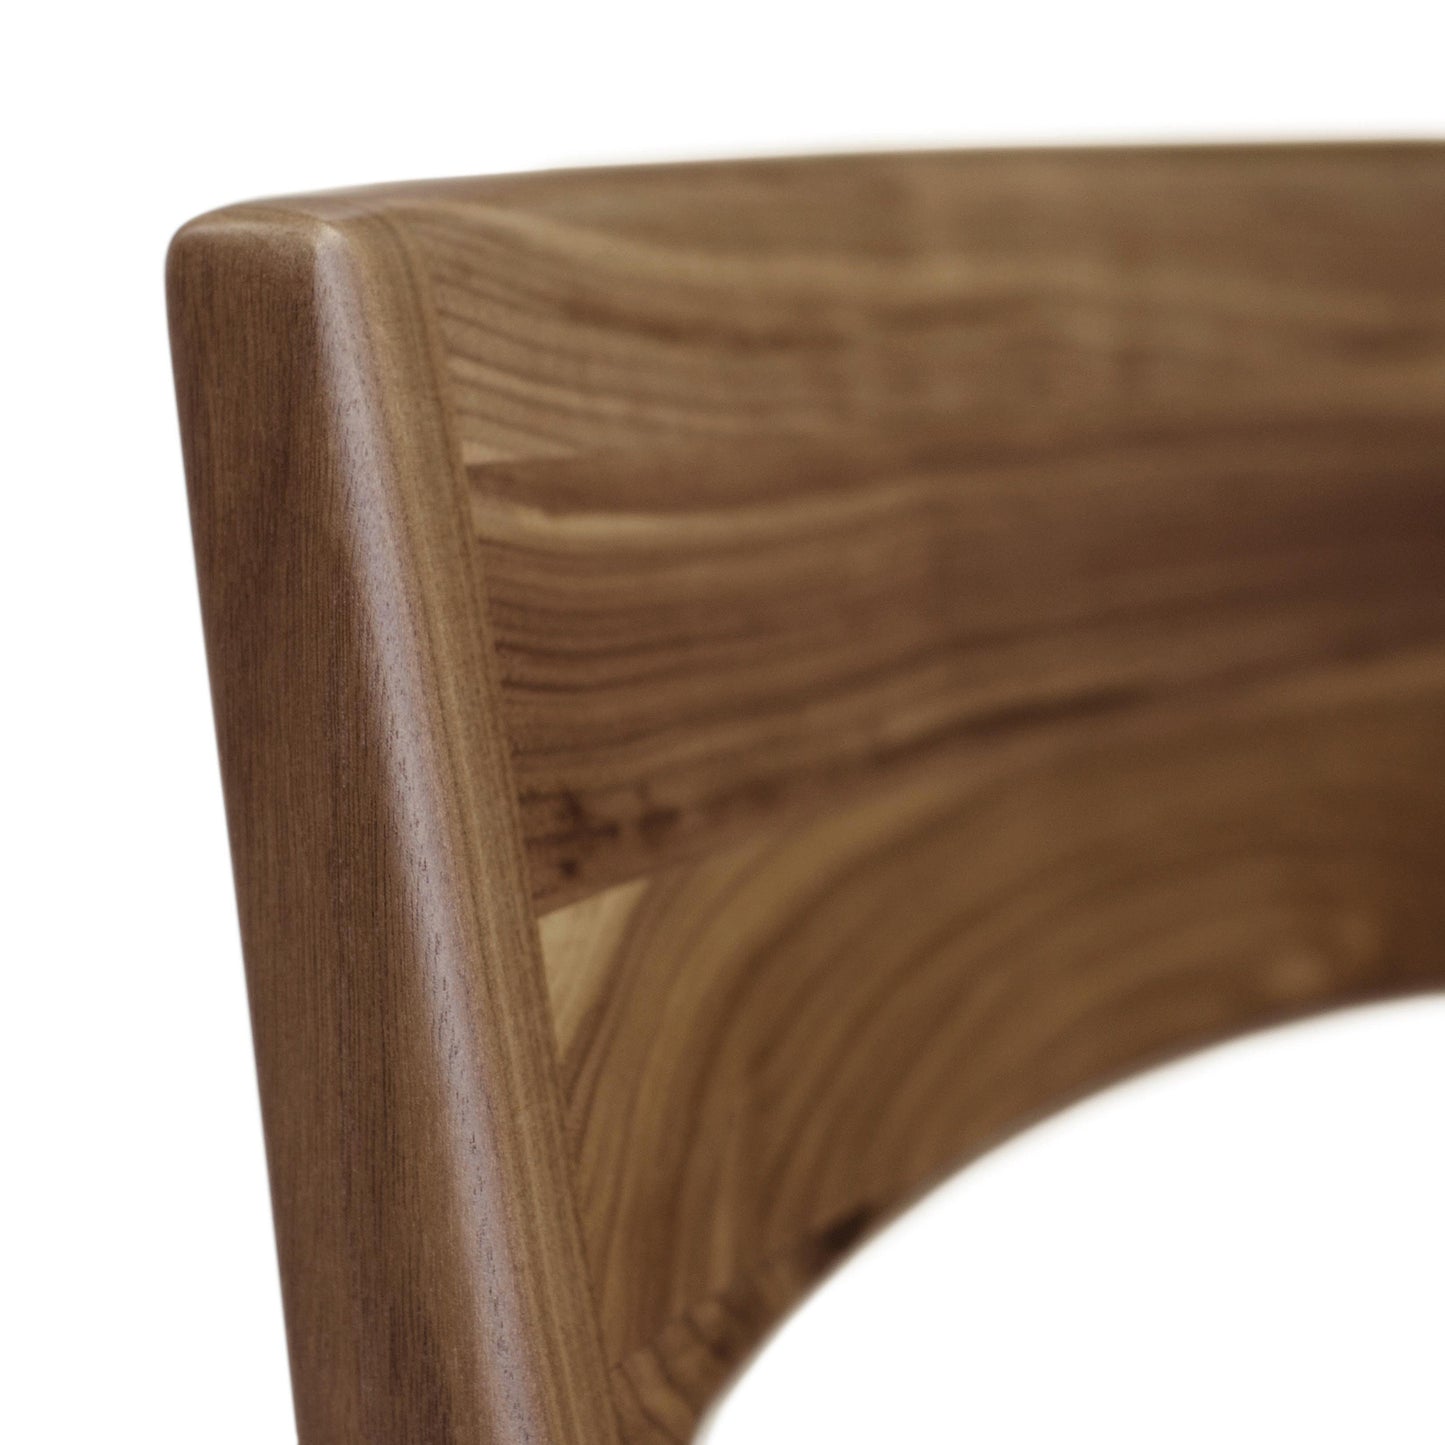 Close-up of a smoothly curved walnut chair arm from the Copeland Furniture Lisse Dining Chair, with visible wood grain detail.